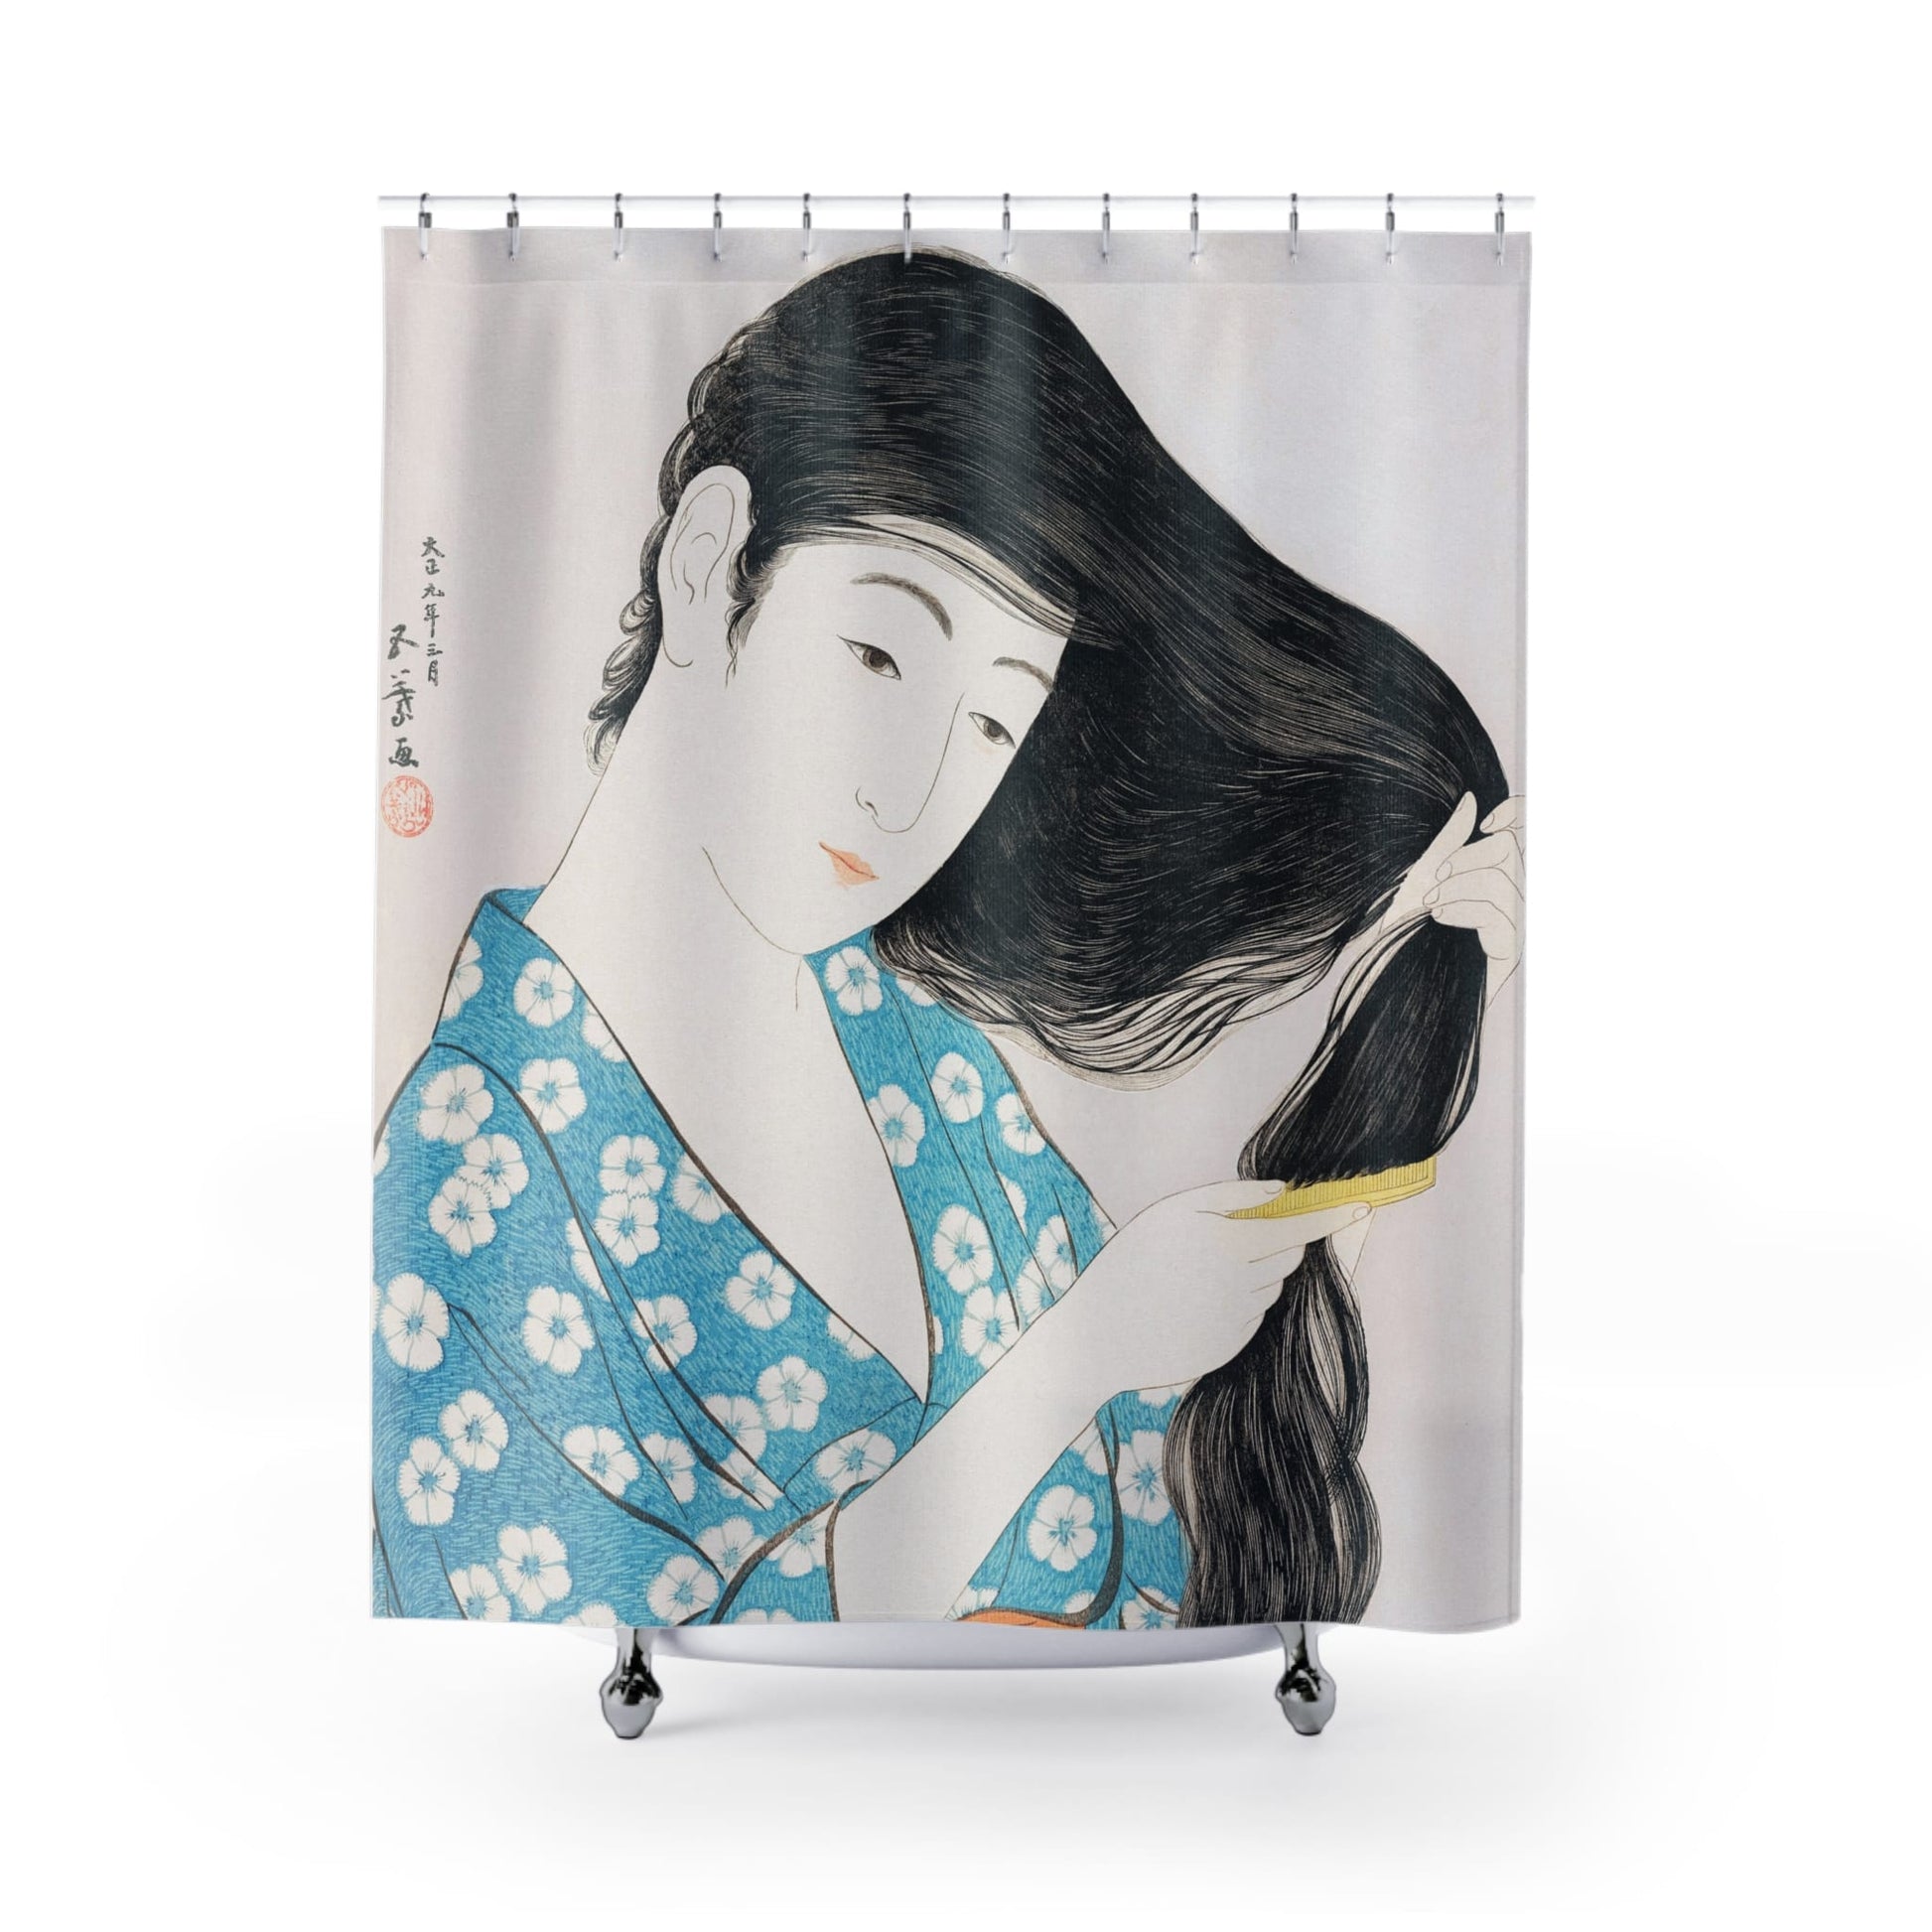 Japanese Art Shower Curtain with woman combing hair design, cultural bathroom decor featuring traditional Japanese scenes.